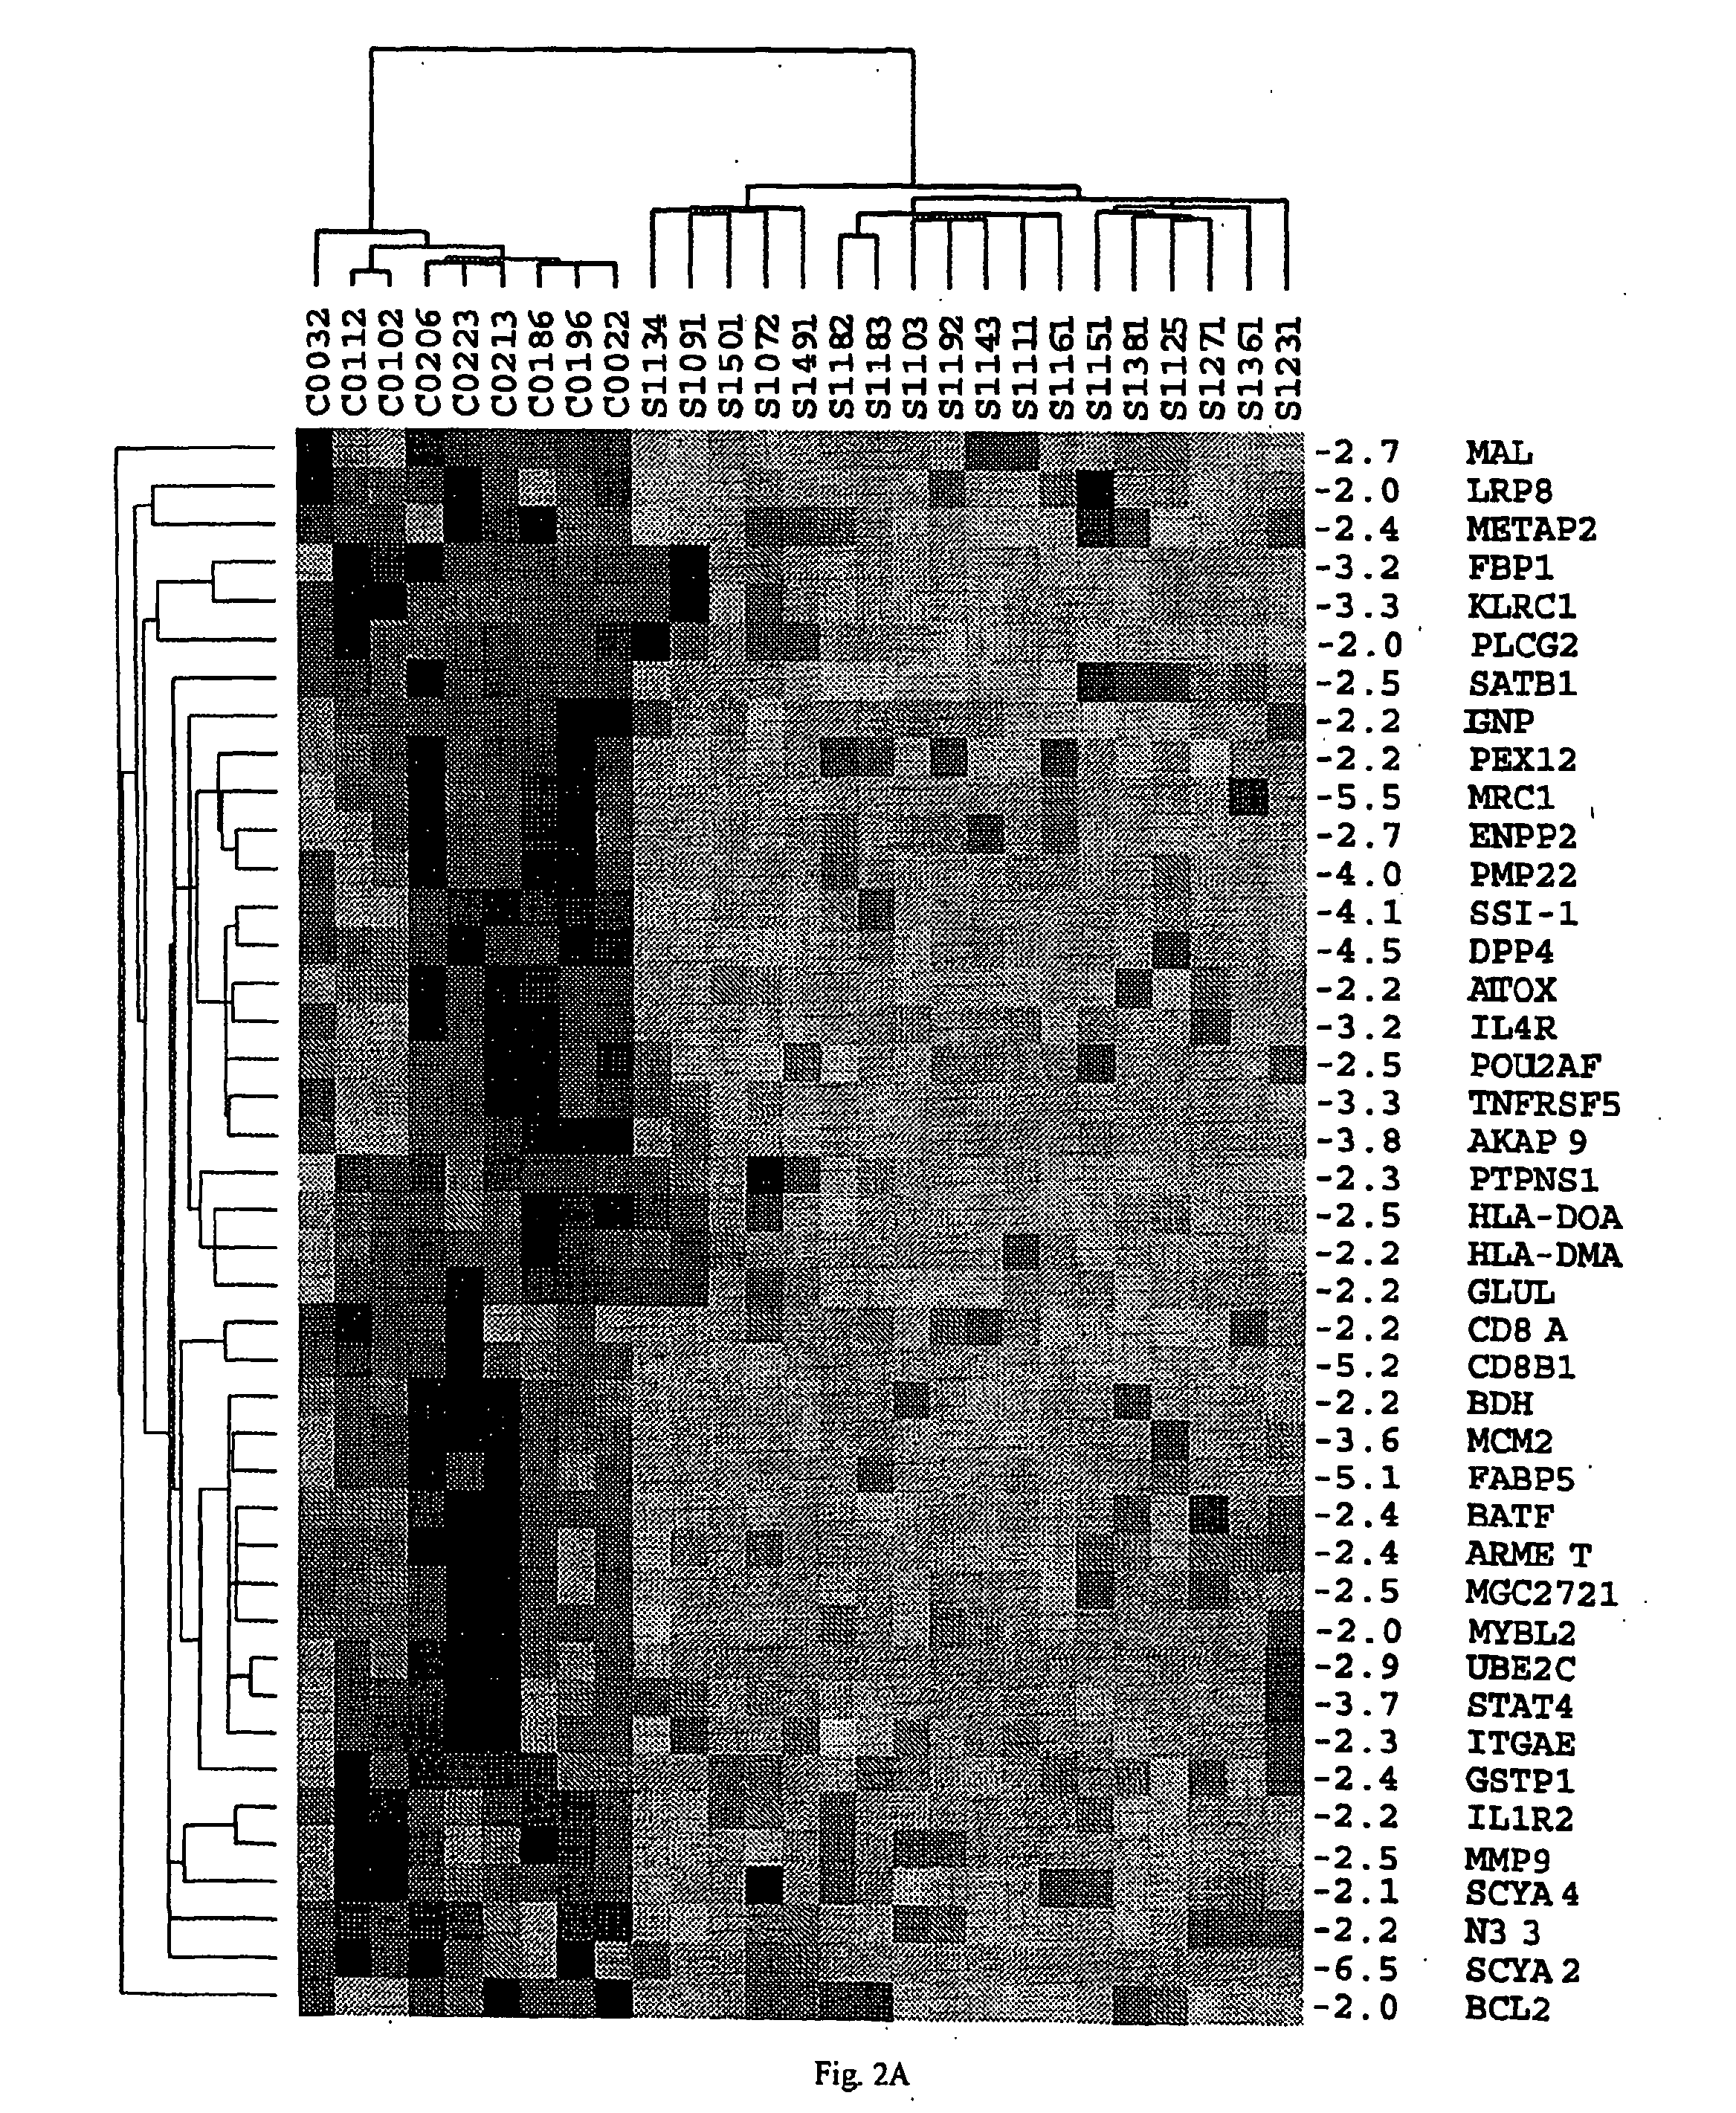 Method of diagnosis of cancer based on gene expression profiles in cells